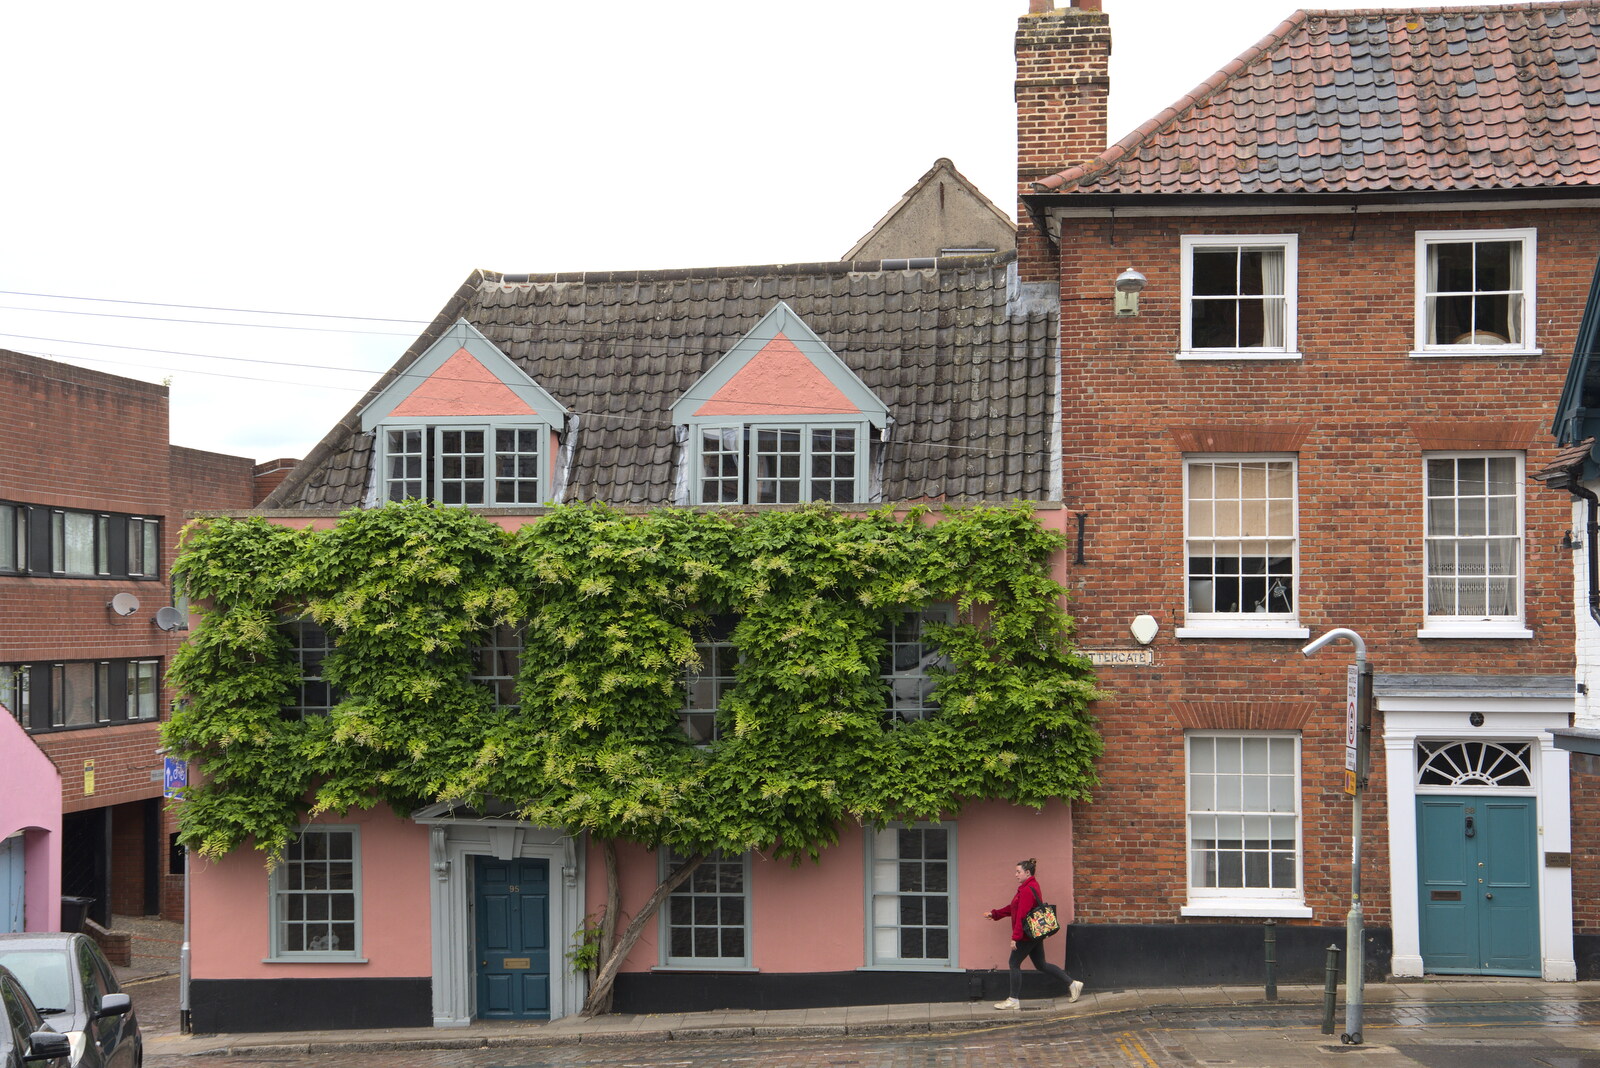 A Wisteria house on Pottergate from Discovering the Hidden City: Norwich, Norfolk - 23rd May 2022